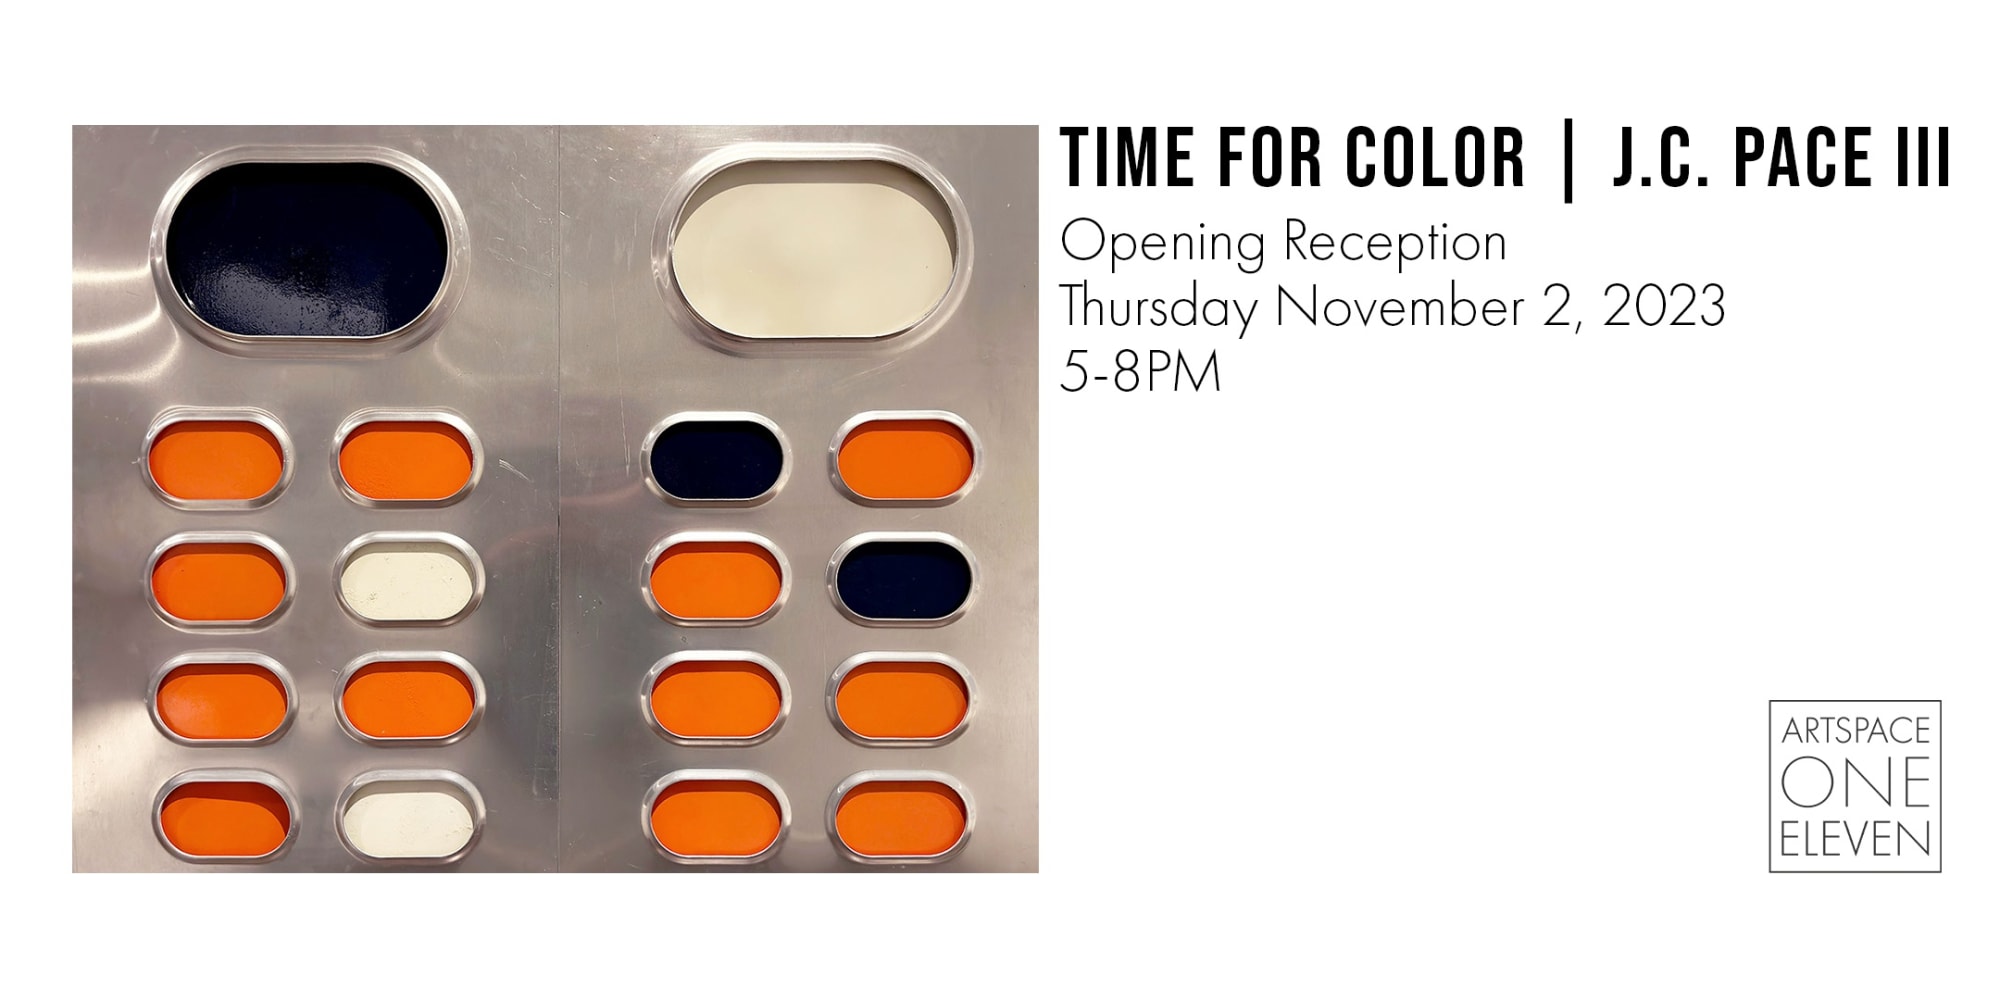 Time for Color | J.C. Pace III